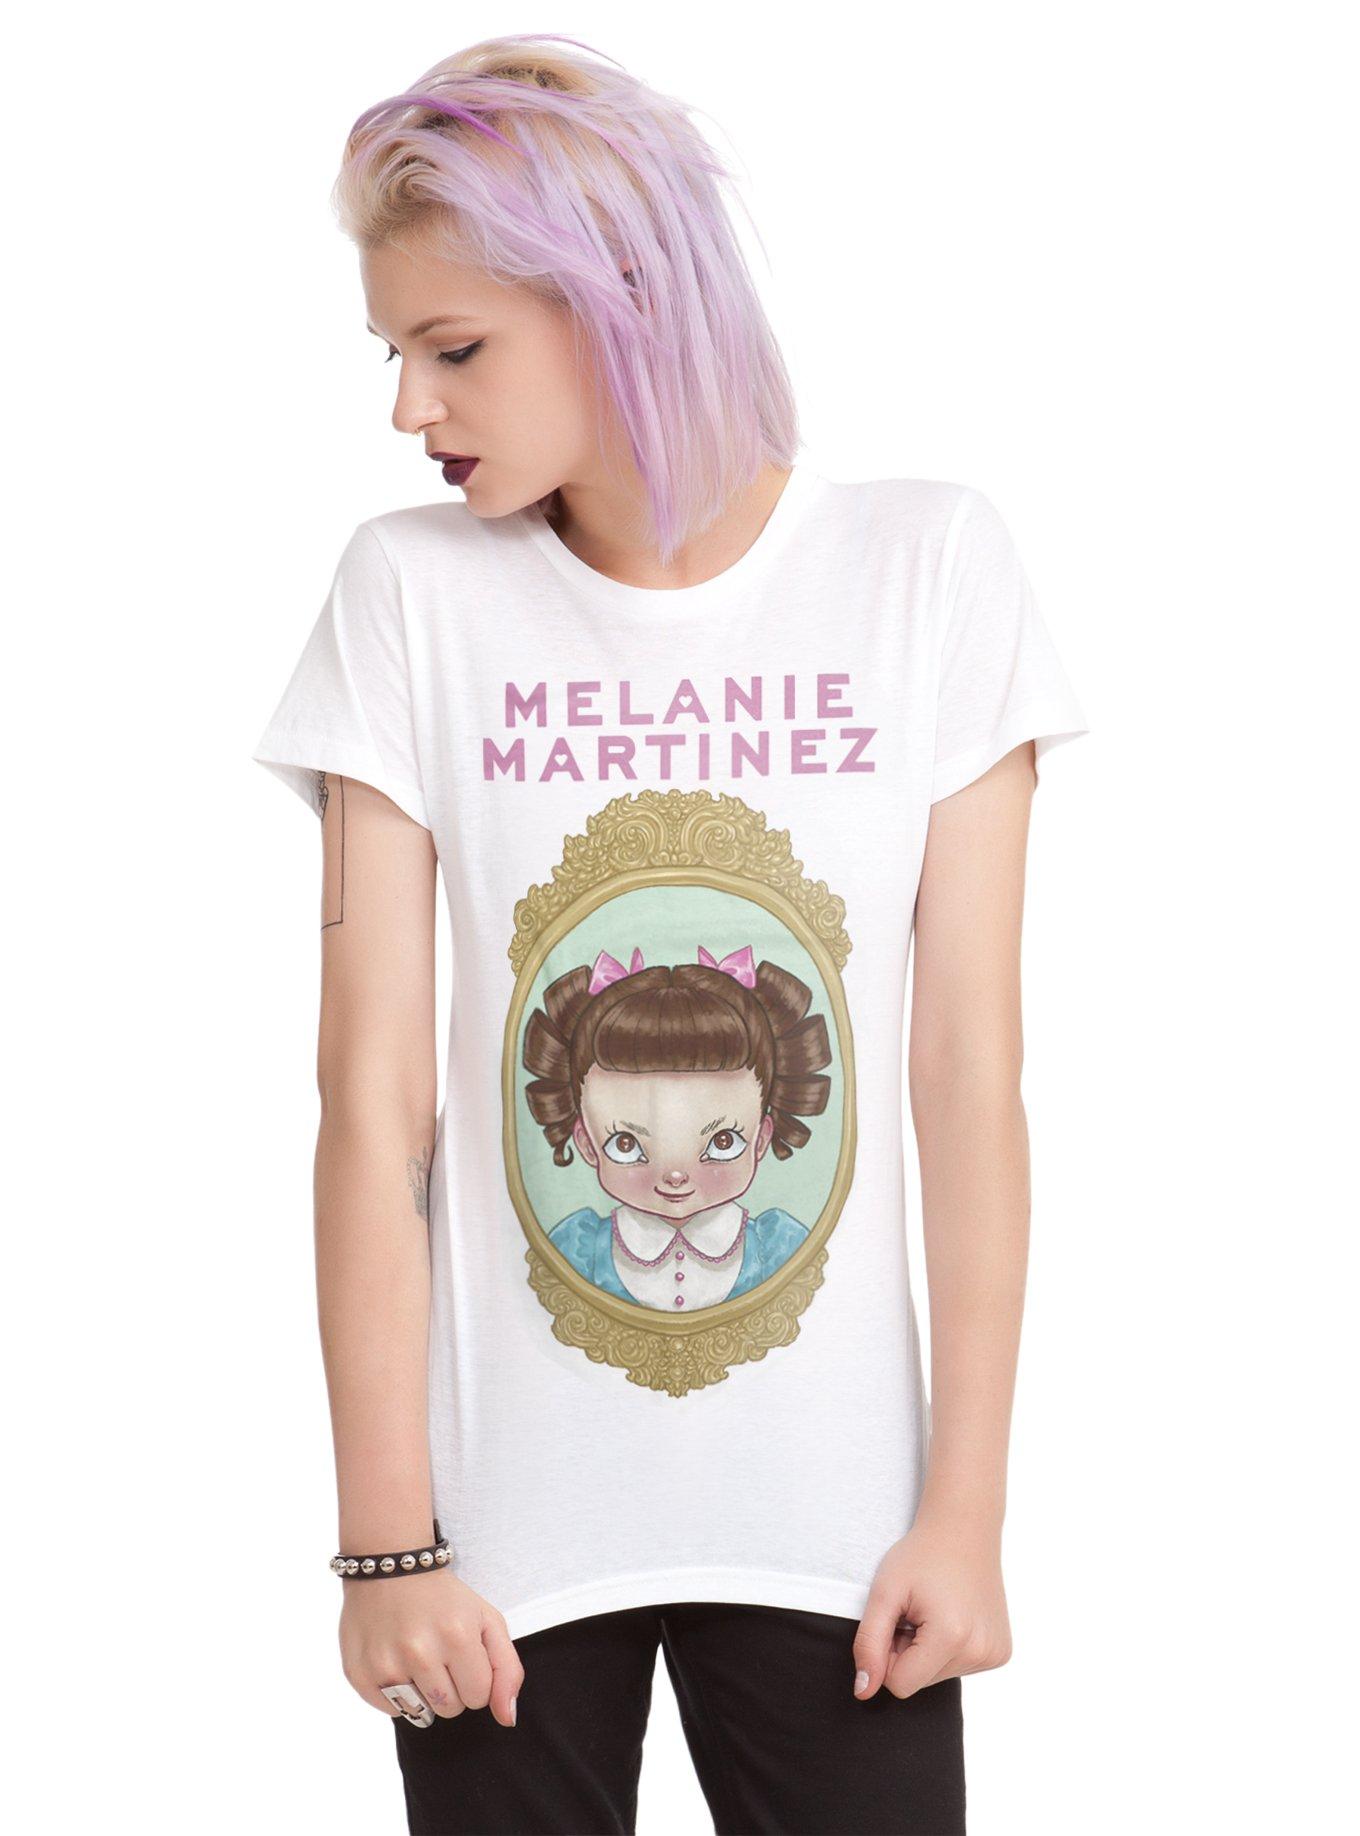 Hot Topic - Looking for Melanie Martinez merch? Dry those tears.